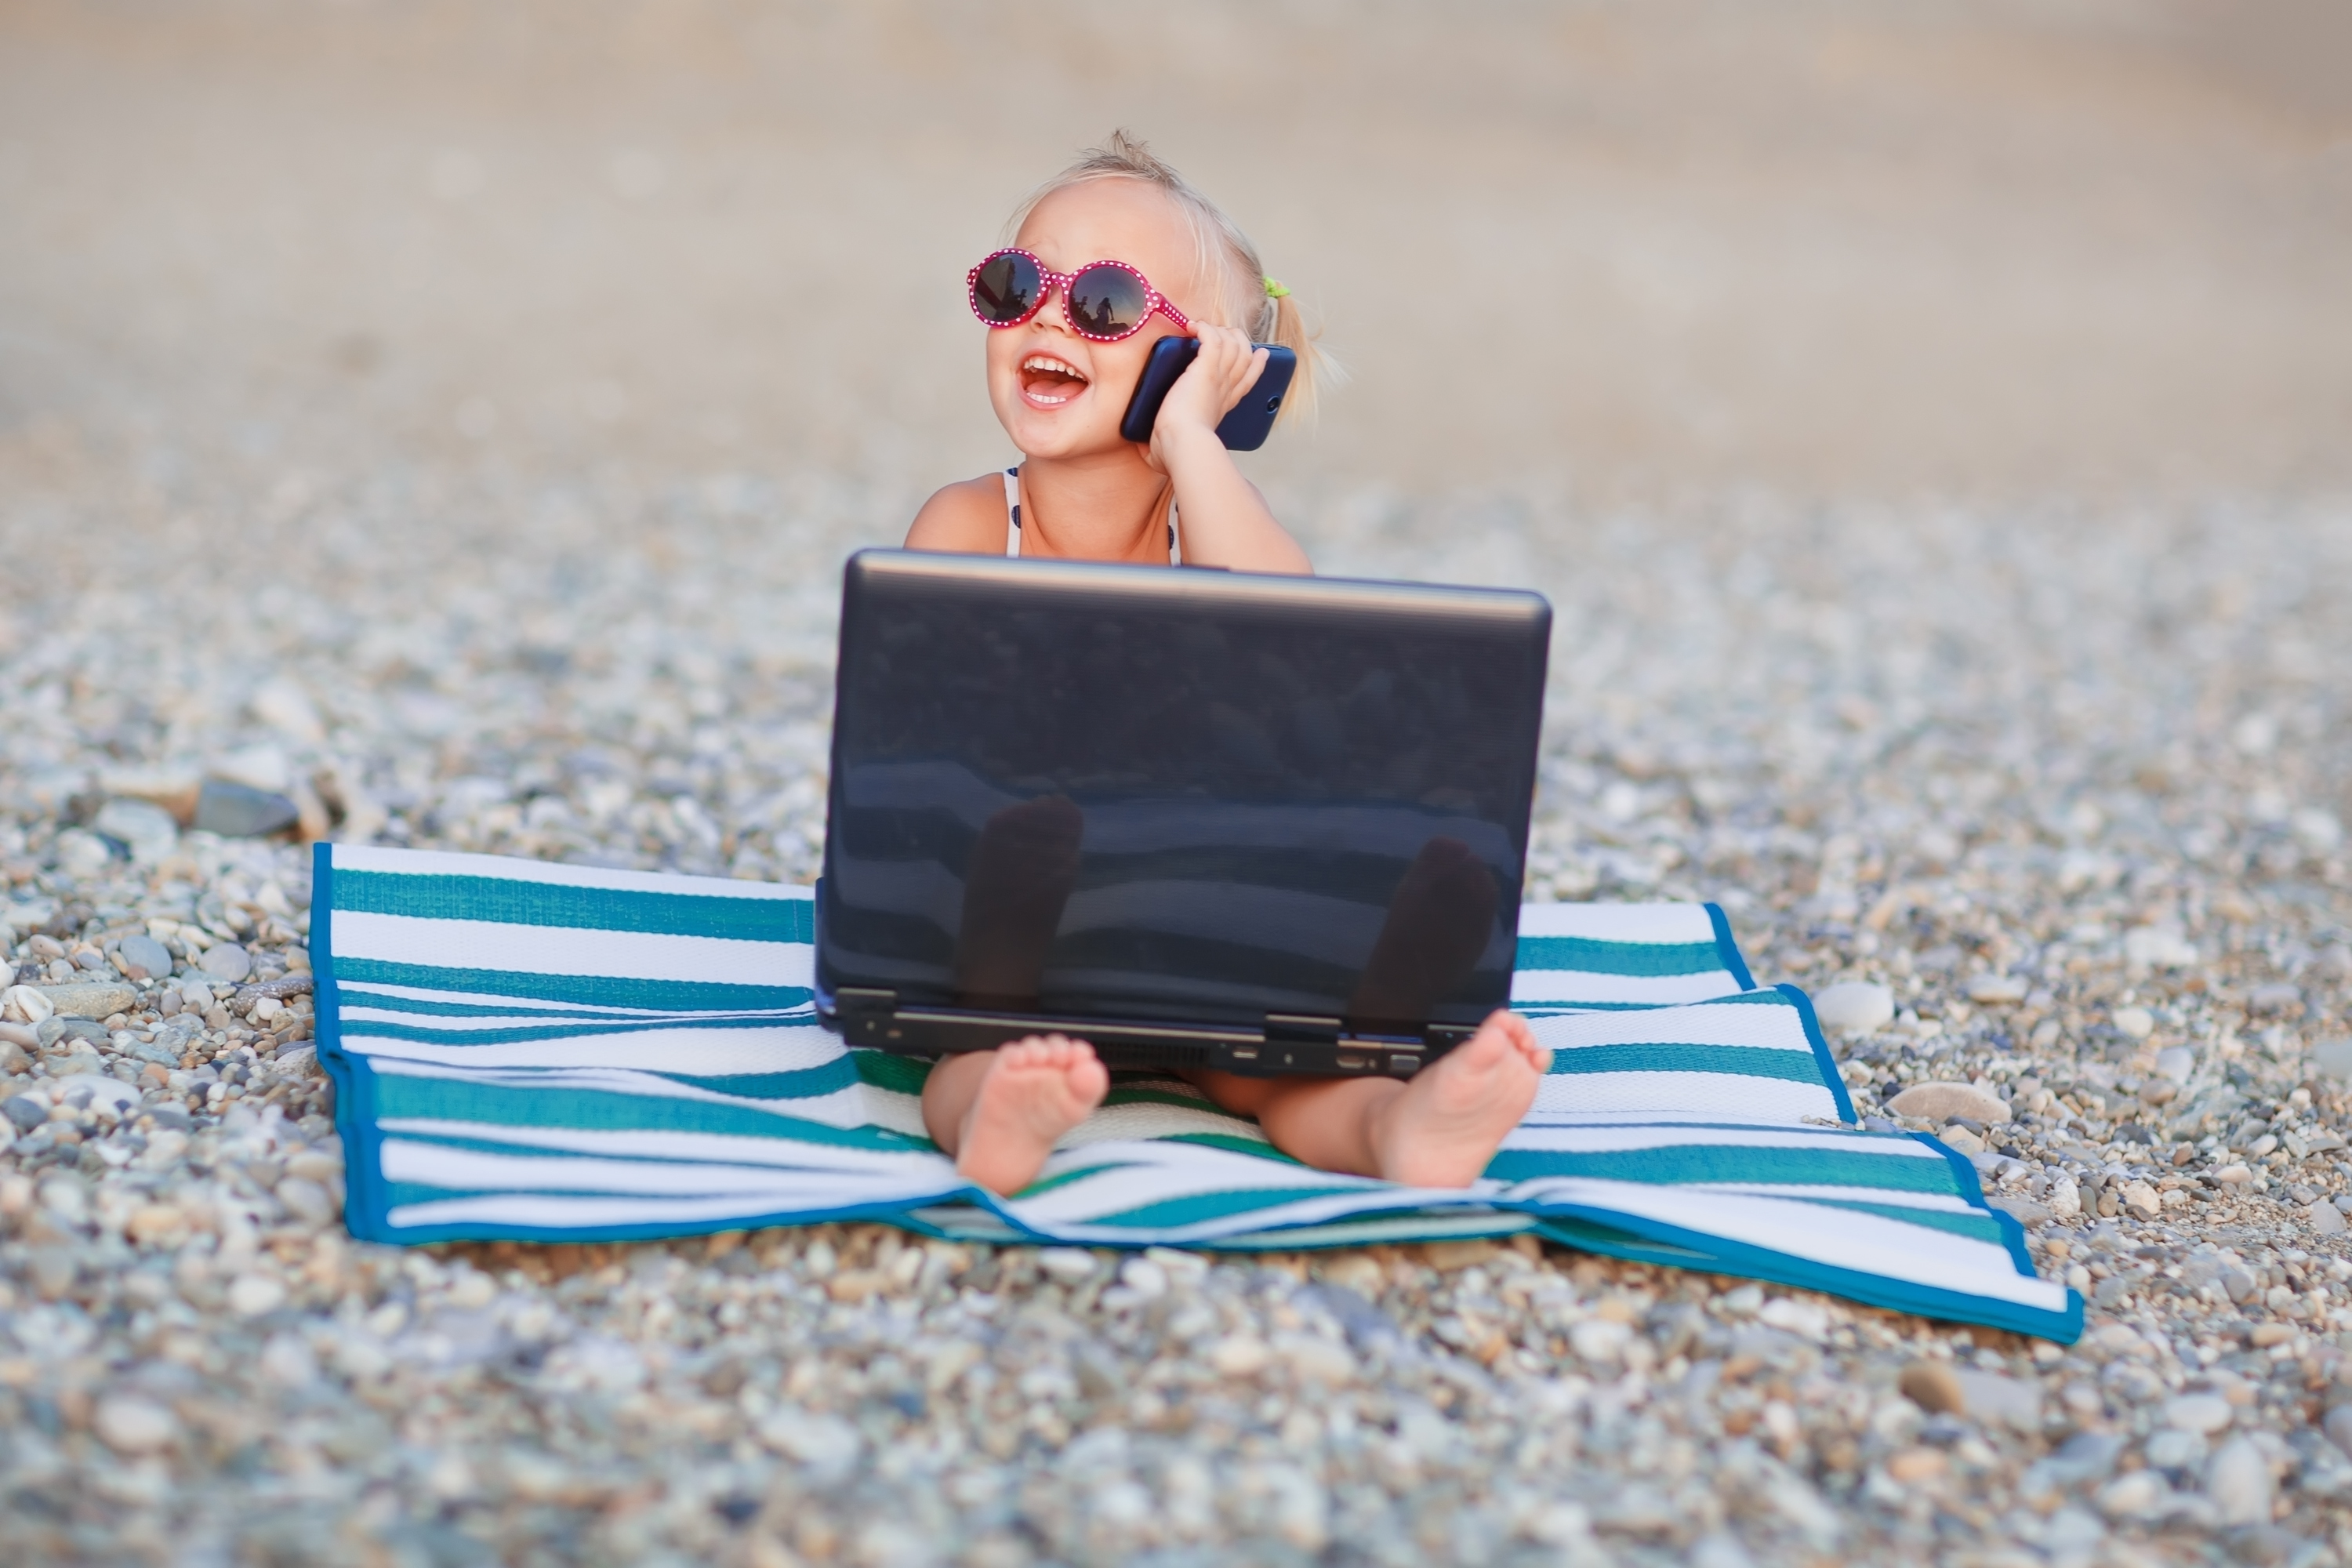 #Unplugged: Keeping kids off technology on your holiday